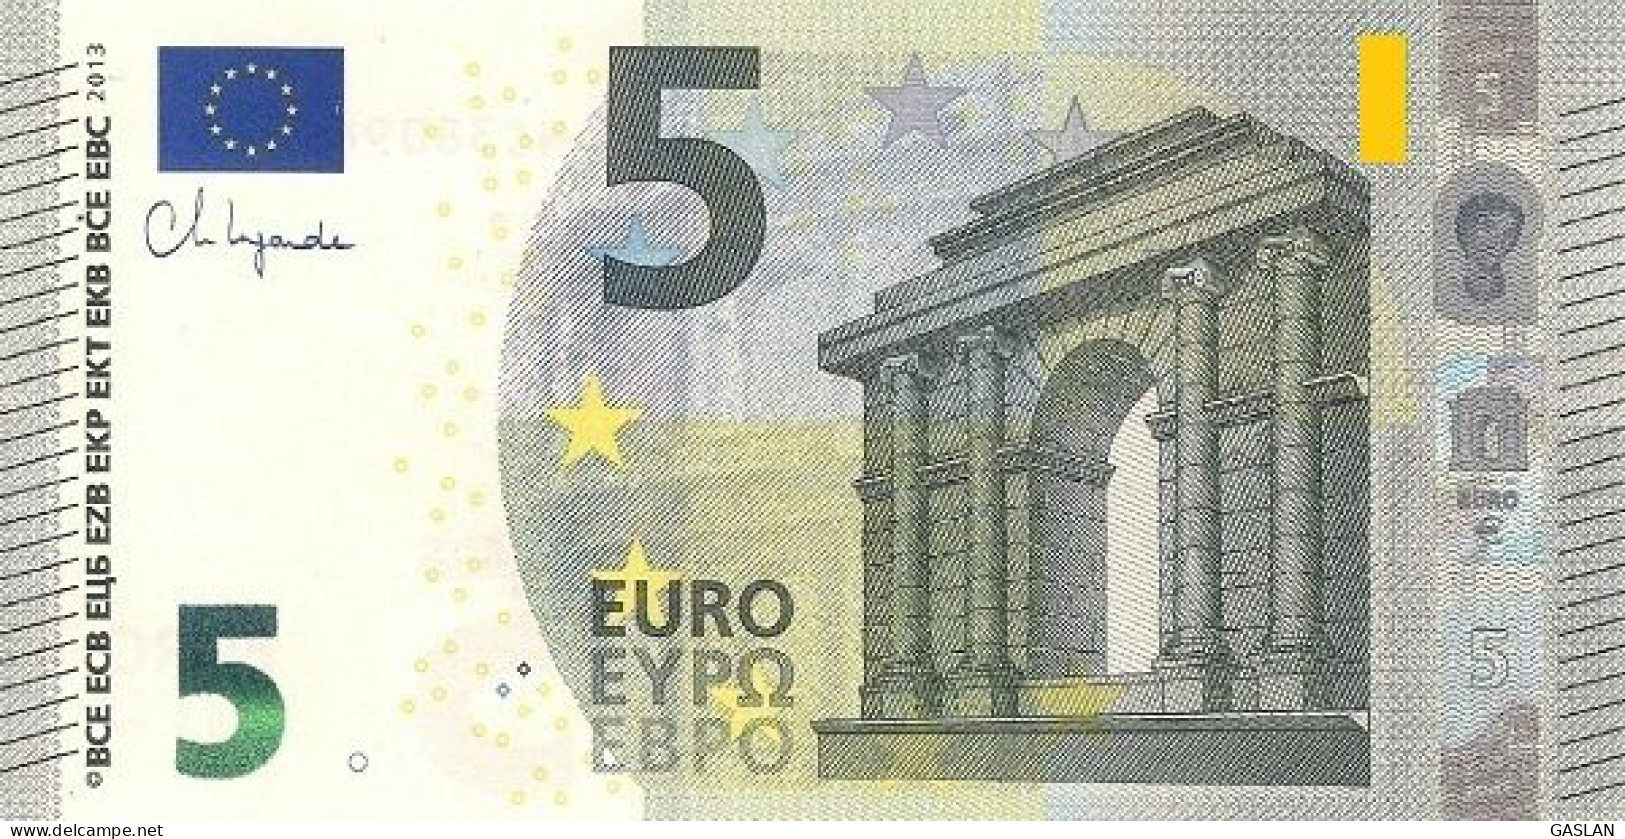 AUSTRIA FRANCE GREECE PORTUGAL SPAIN 5 EURO A1 UNC LAGARDE ONLY ONE,  SEE DESCRIPTION FOR DETAILS - 5 Euro